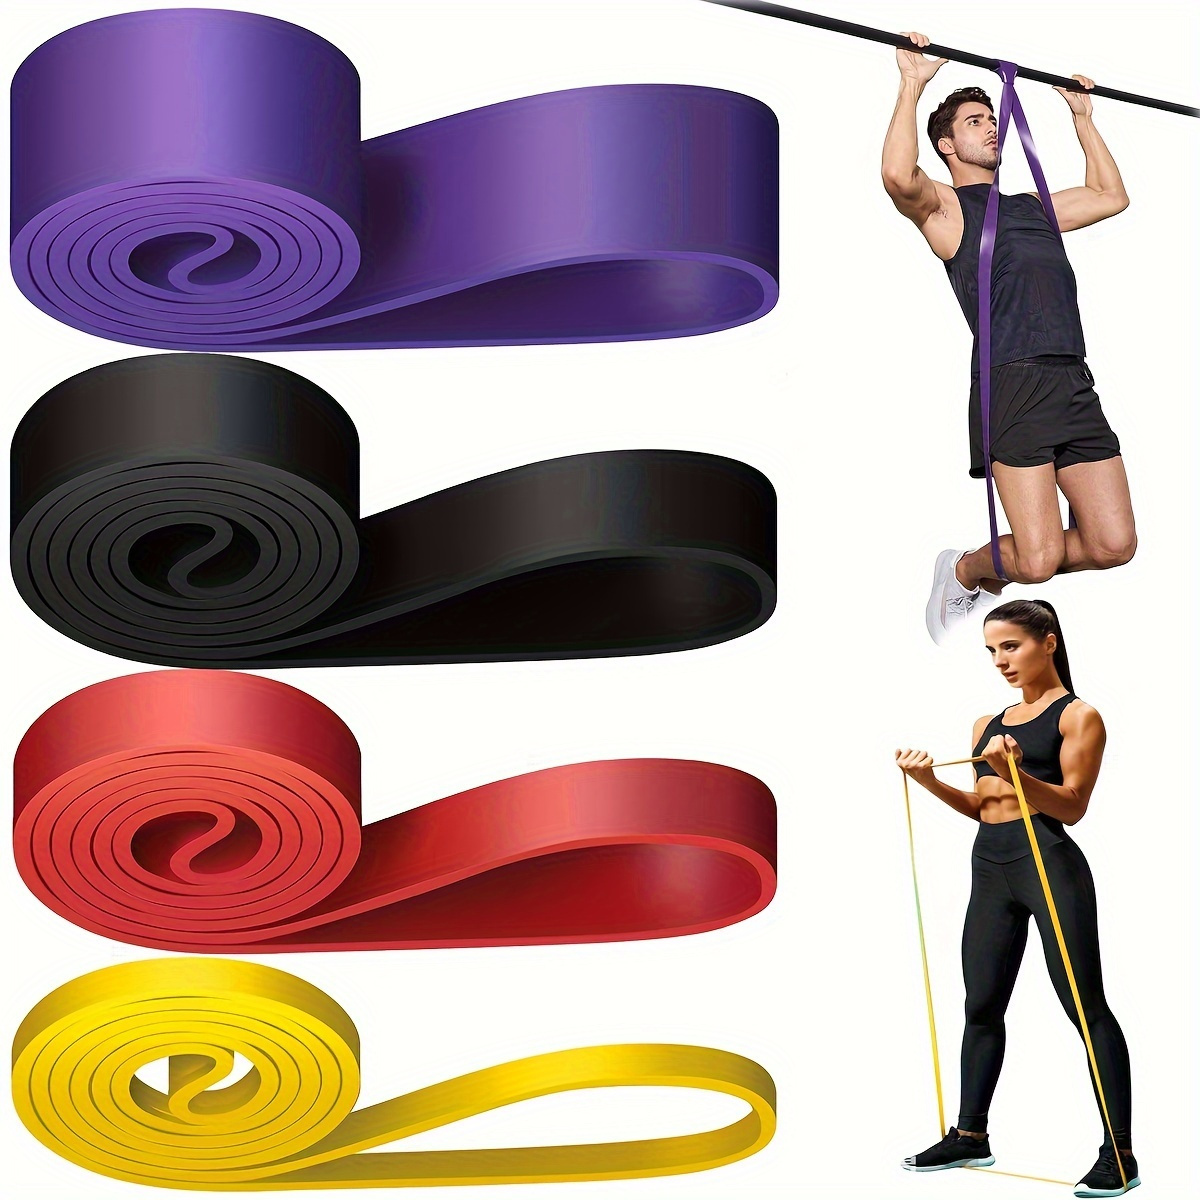 

4pcs Yoga Resistance Tension Bands, Fitness Pull Up Bands, Workout Equipment For Exercise, Body Stretching, Strength Training